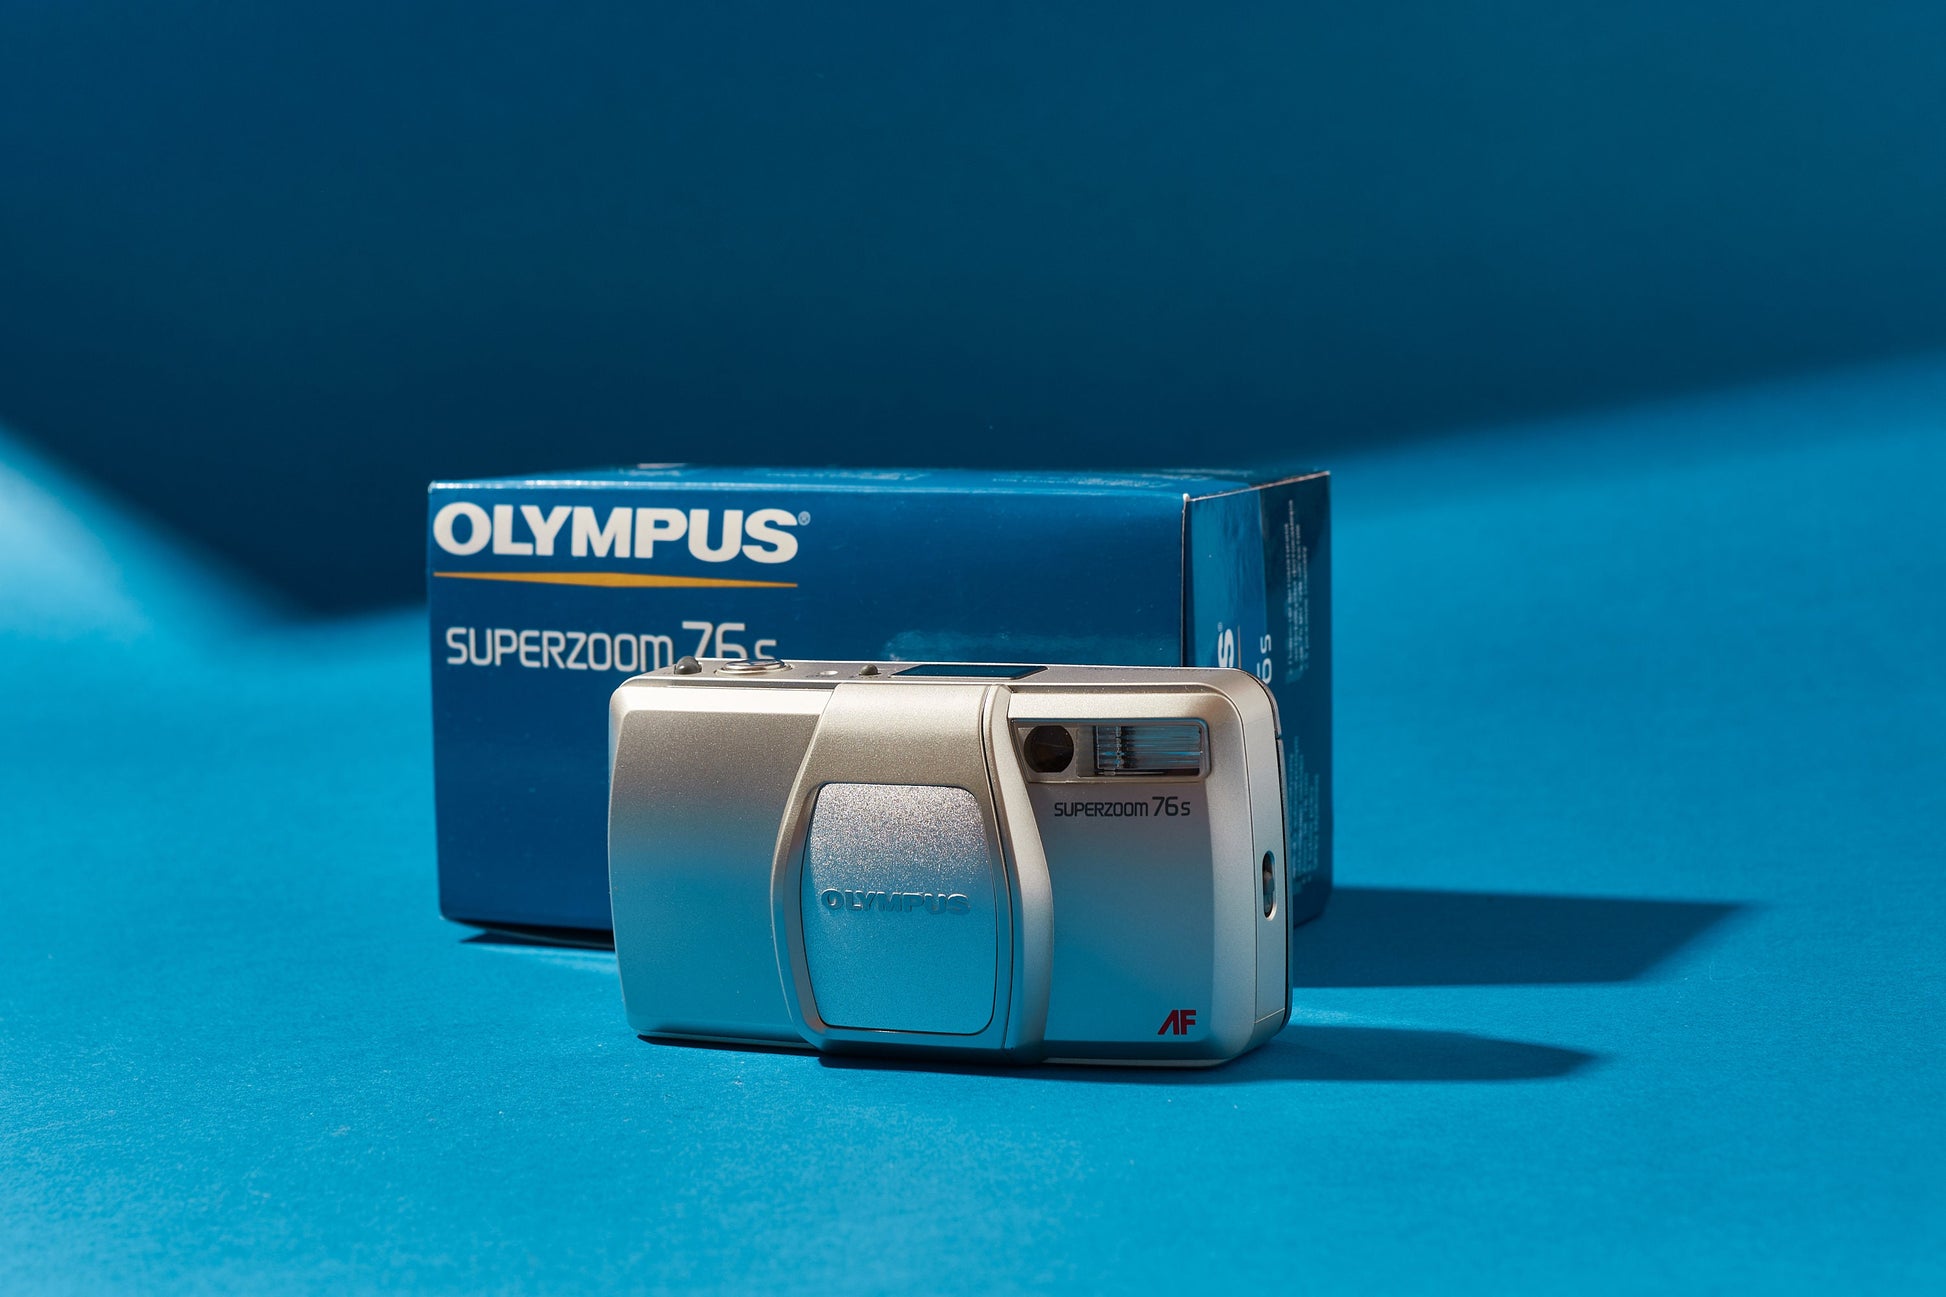 Vintage Olympus SuperZOOM 76s Film Camera - Perfect Gift for Beginners - Retro Photography Gift - 35mm Film Camera - Vintage Polaroid Instant Cameras